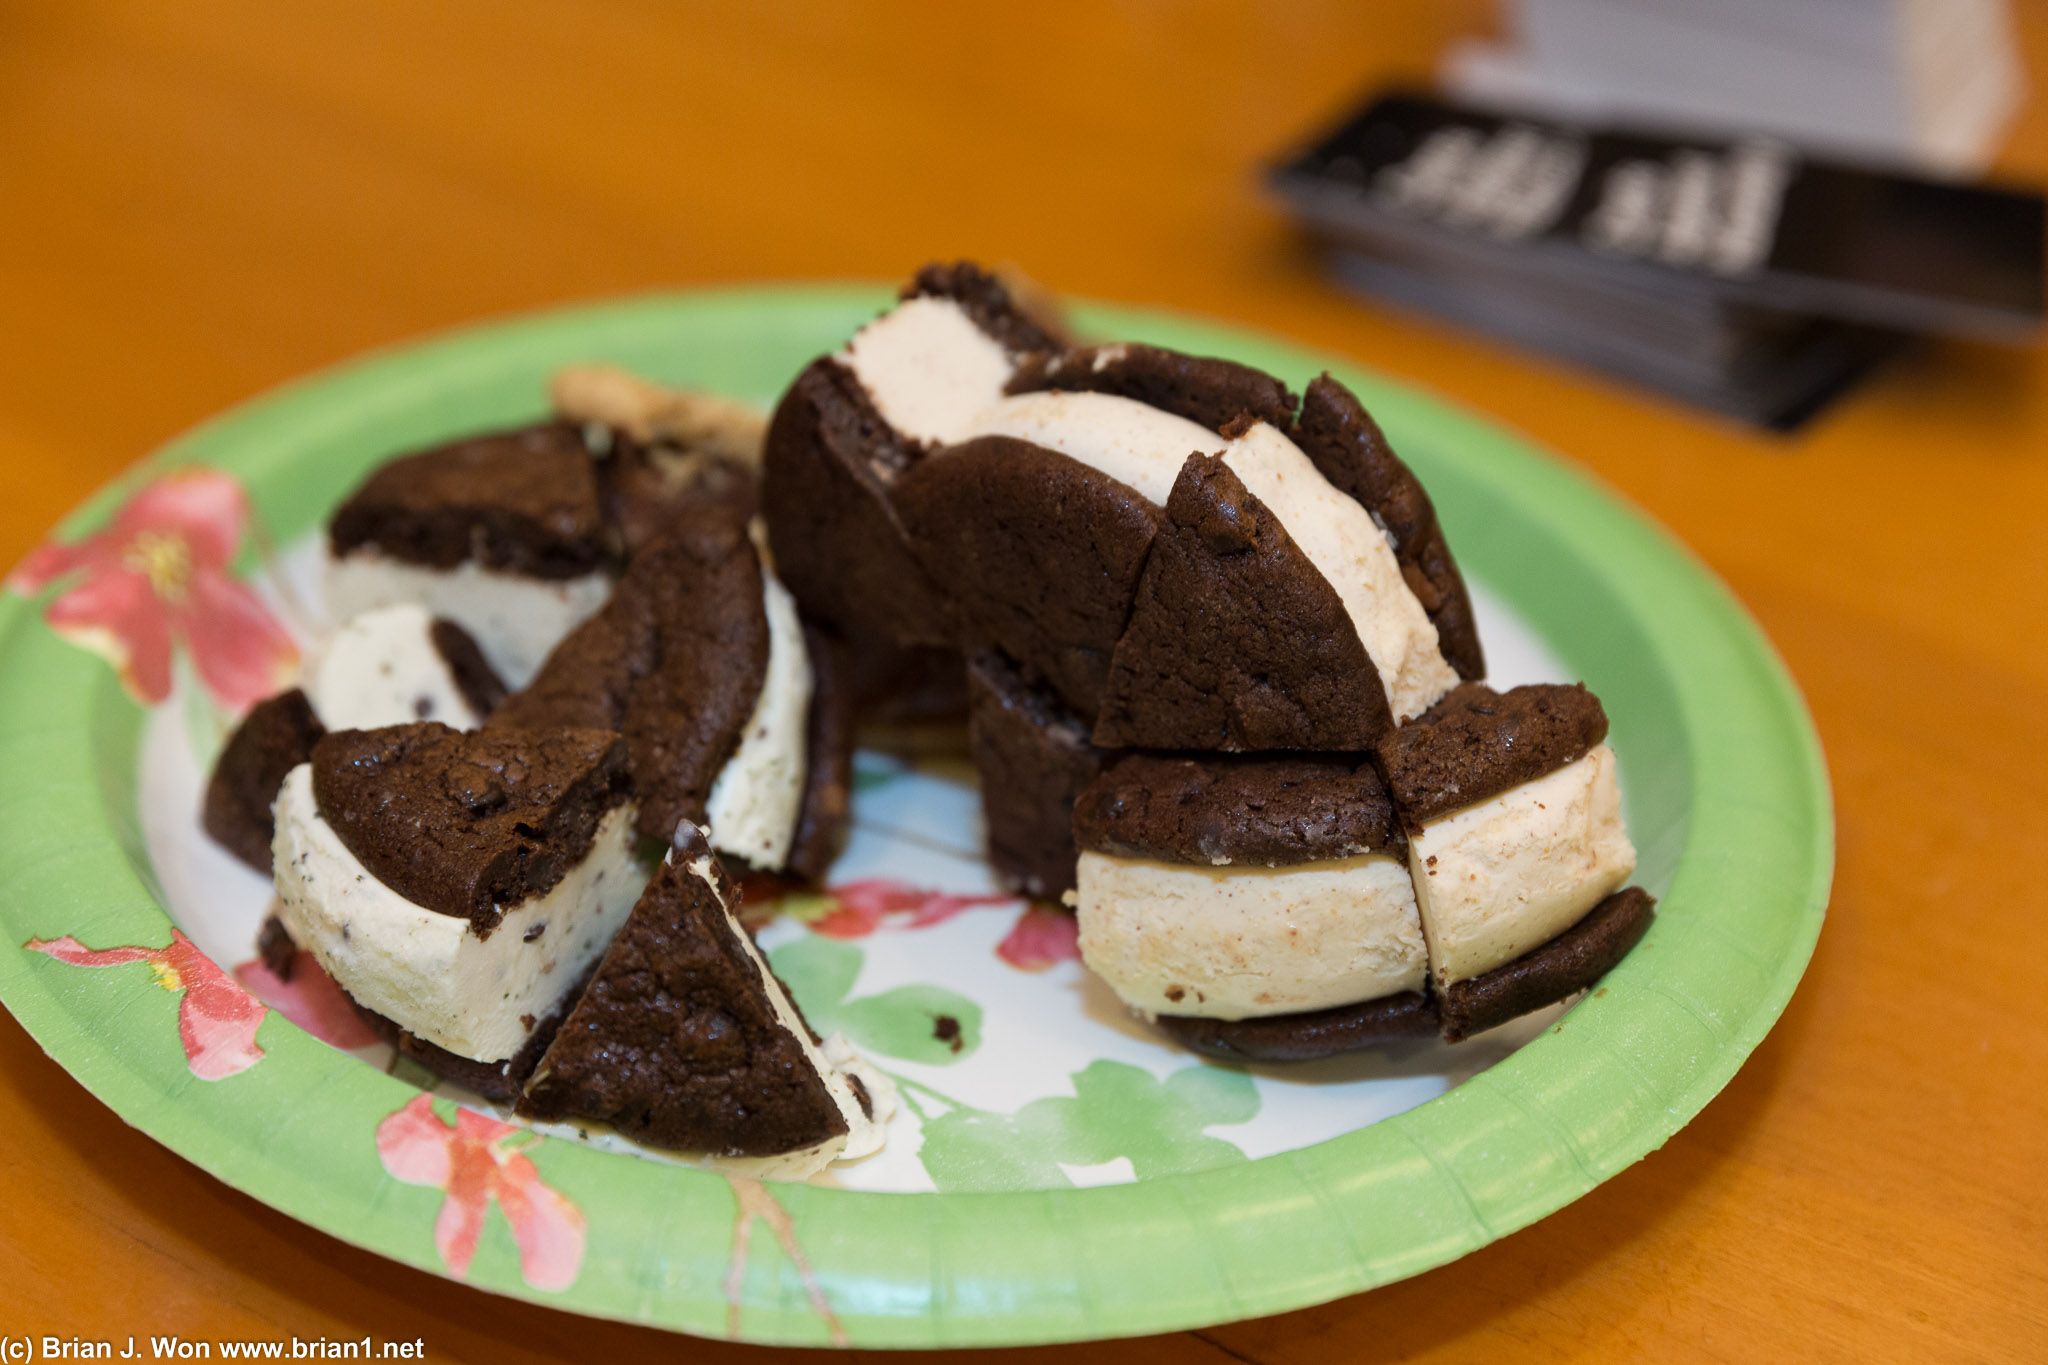 Mmm, ice cream sandwiches (I think from Coolhaus?).